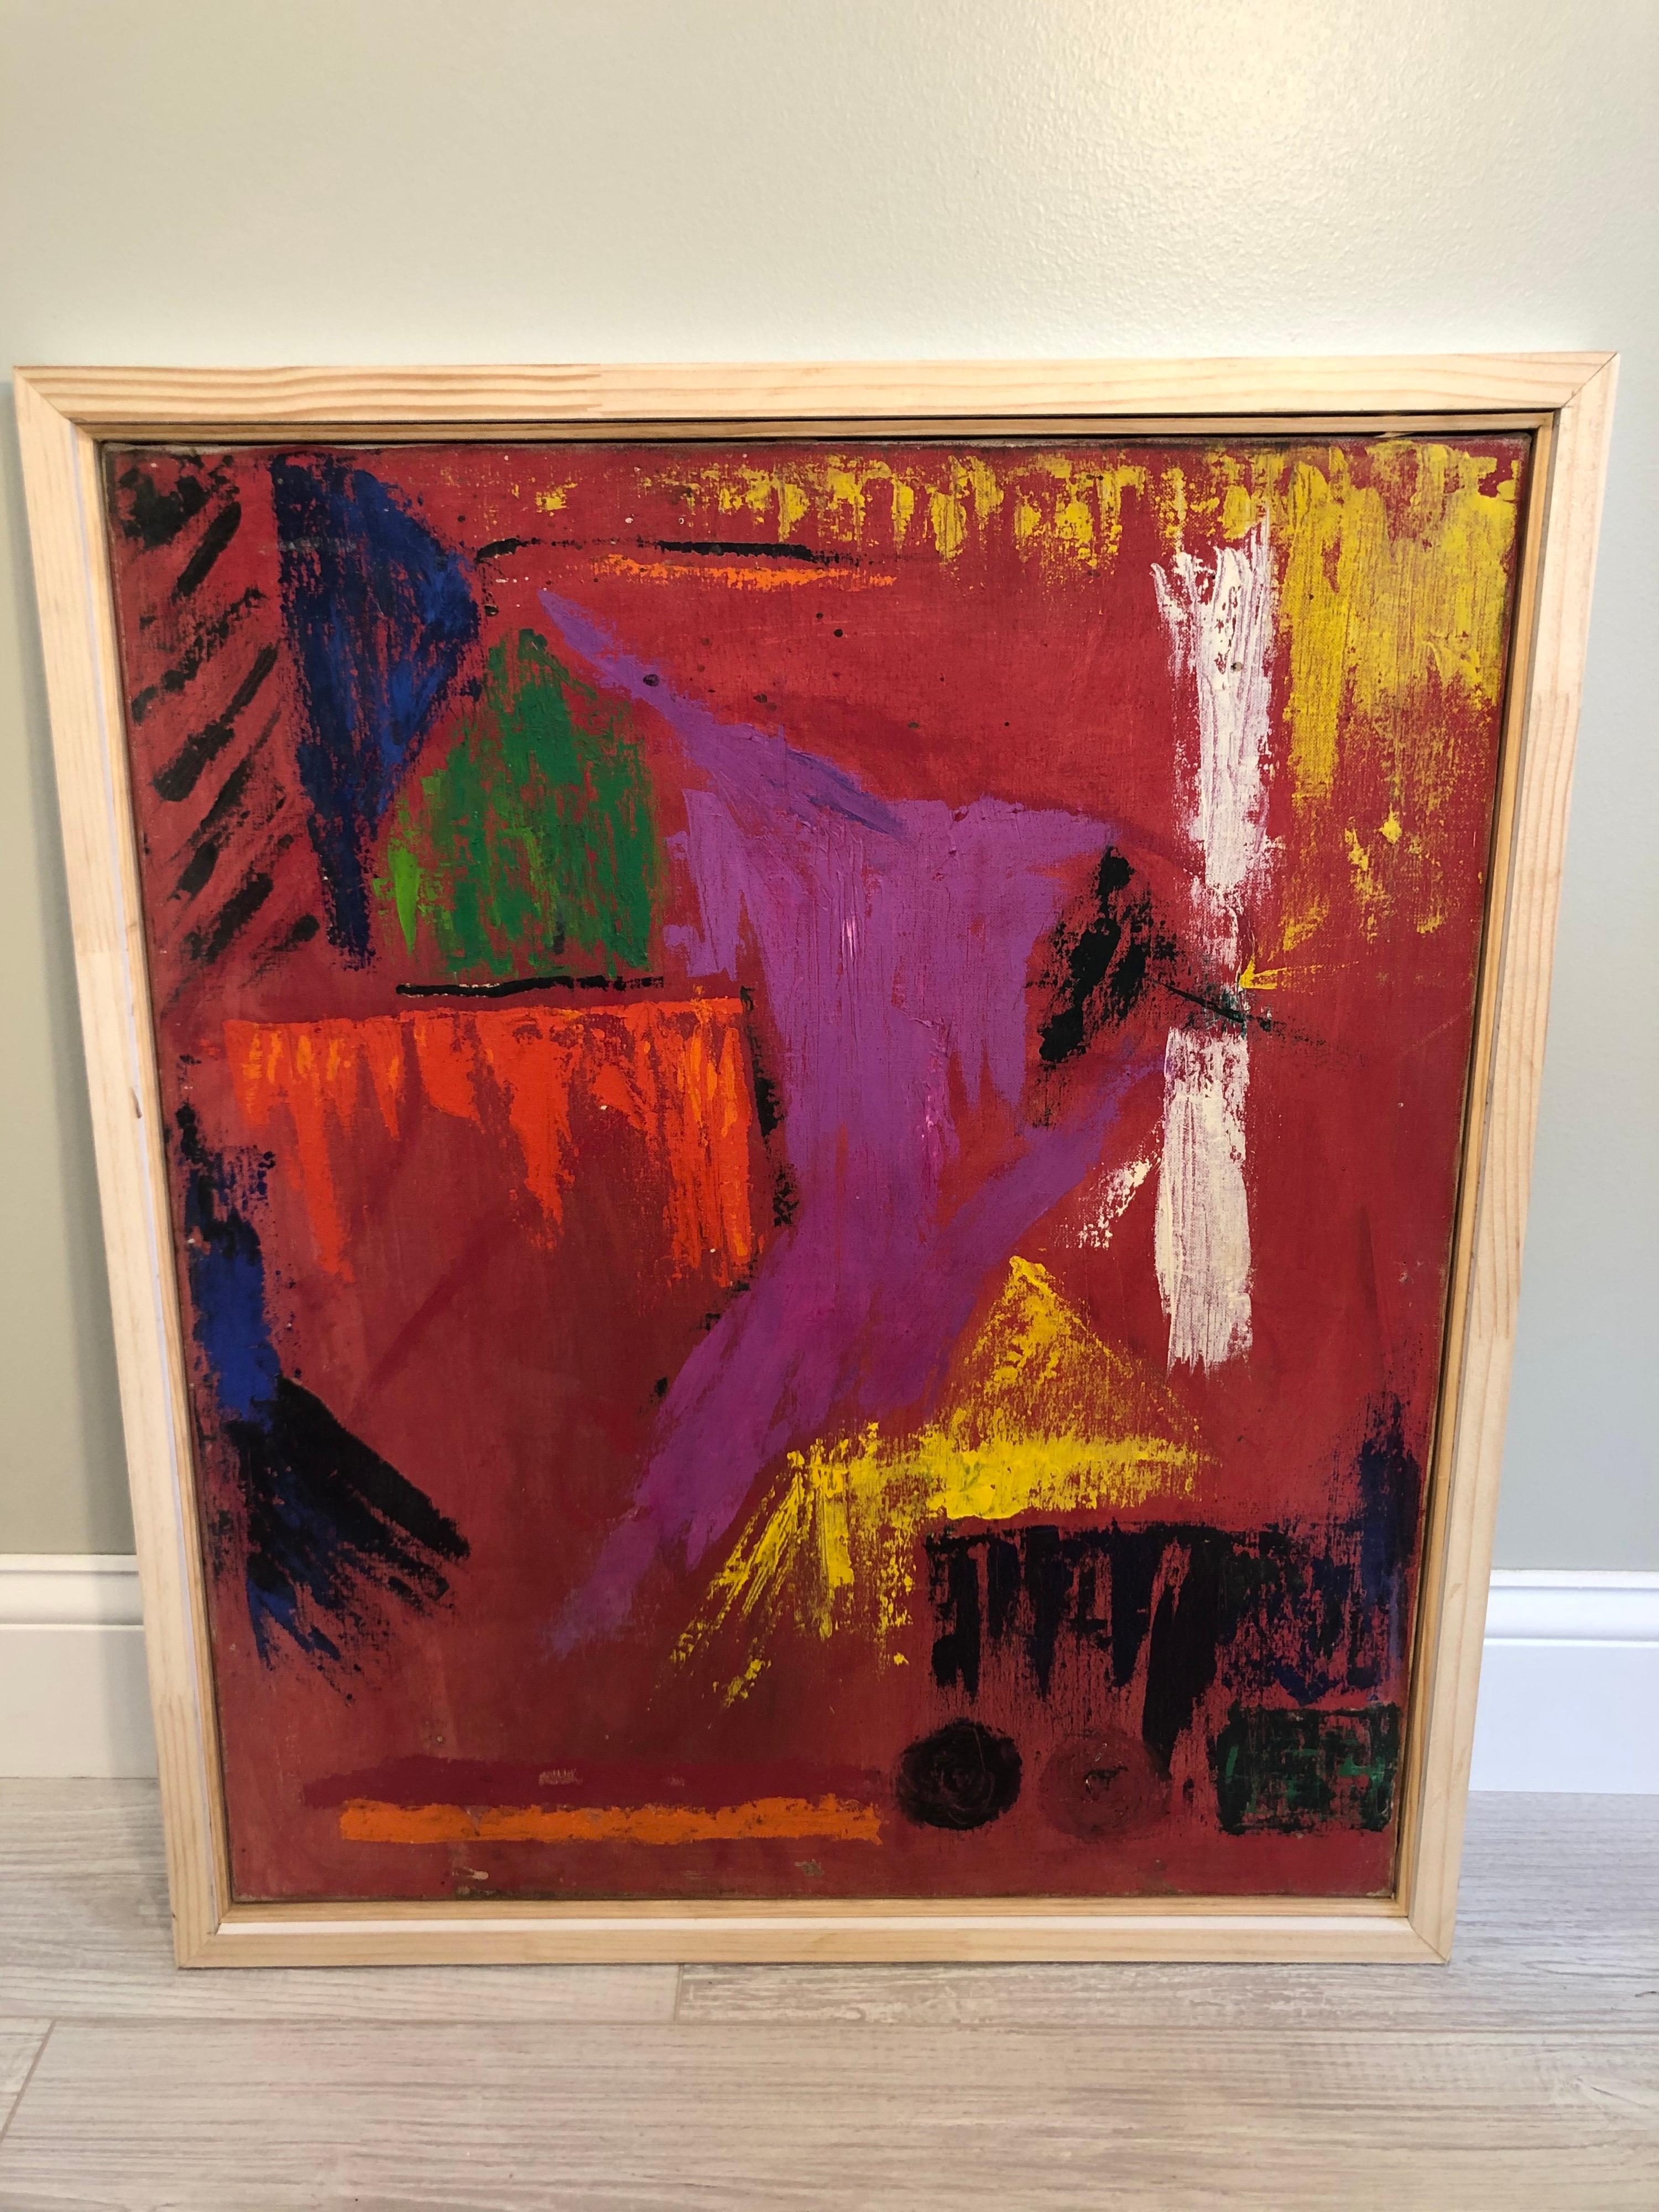 Abstract Mid Century on Canvas. This custom frame has been painted white since being photographed. Nice bright colors make up this abstract modern composition. Possibly attributed to Sheila Heifetz of Weston CT. No signature found. This can parcel